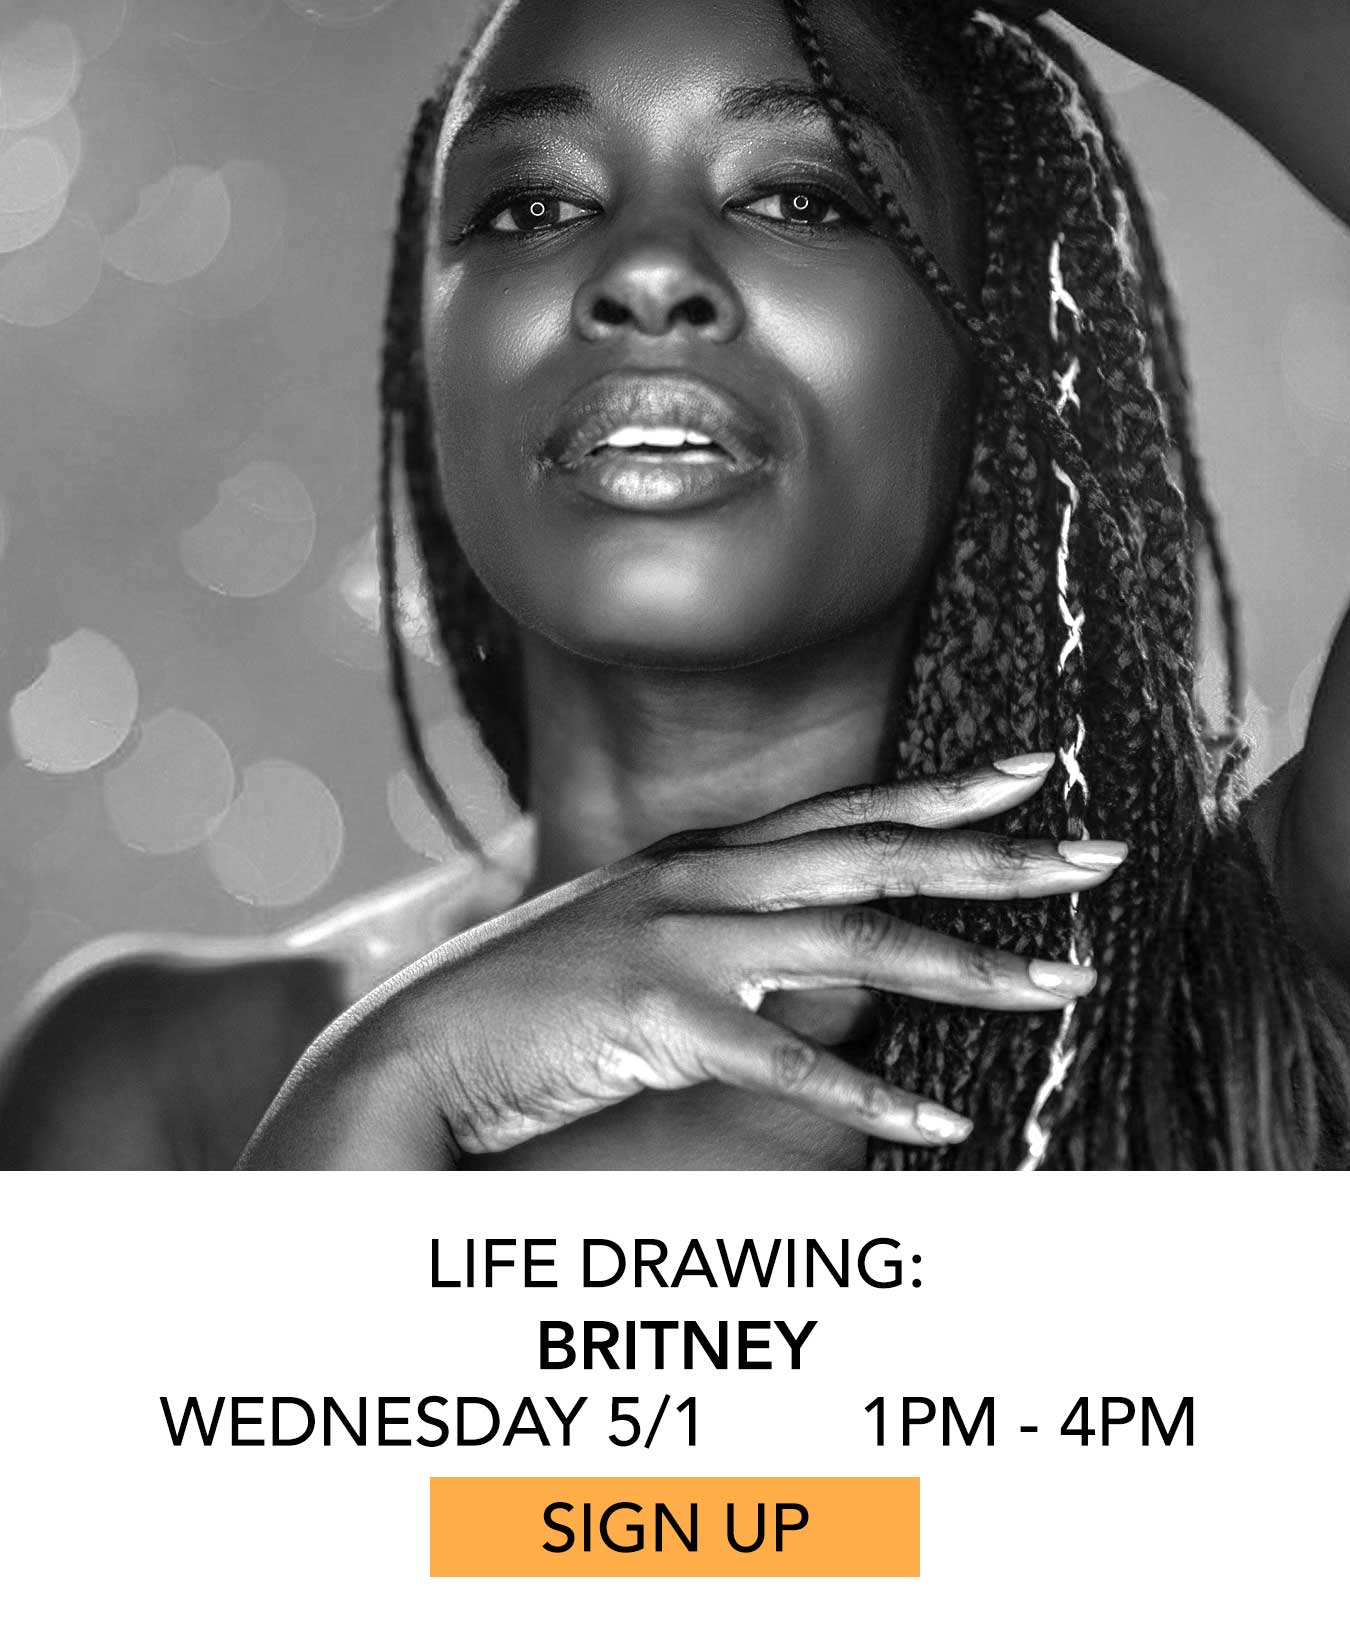 Life Drawing: Britney. Wednesday 5/1 from 1pm to 4pm. Click to Sign Up.